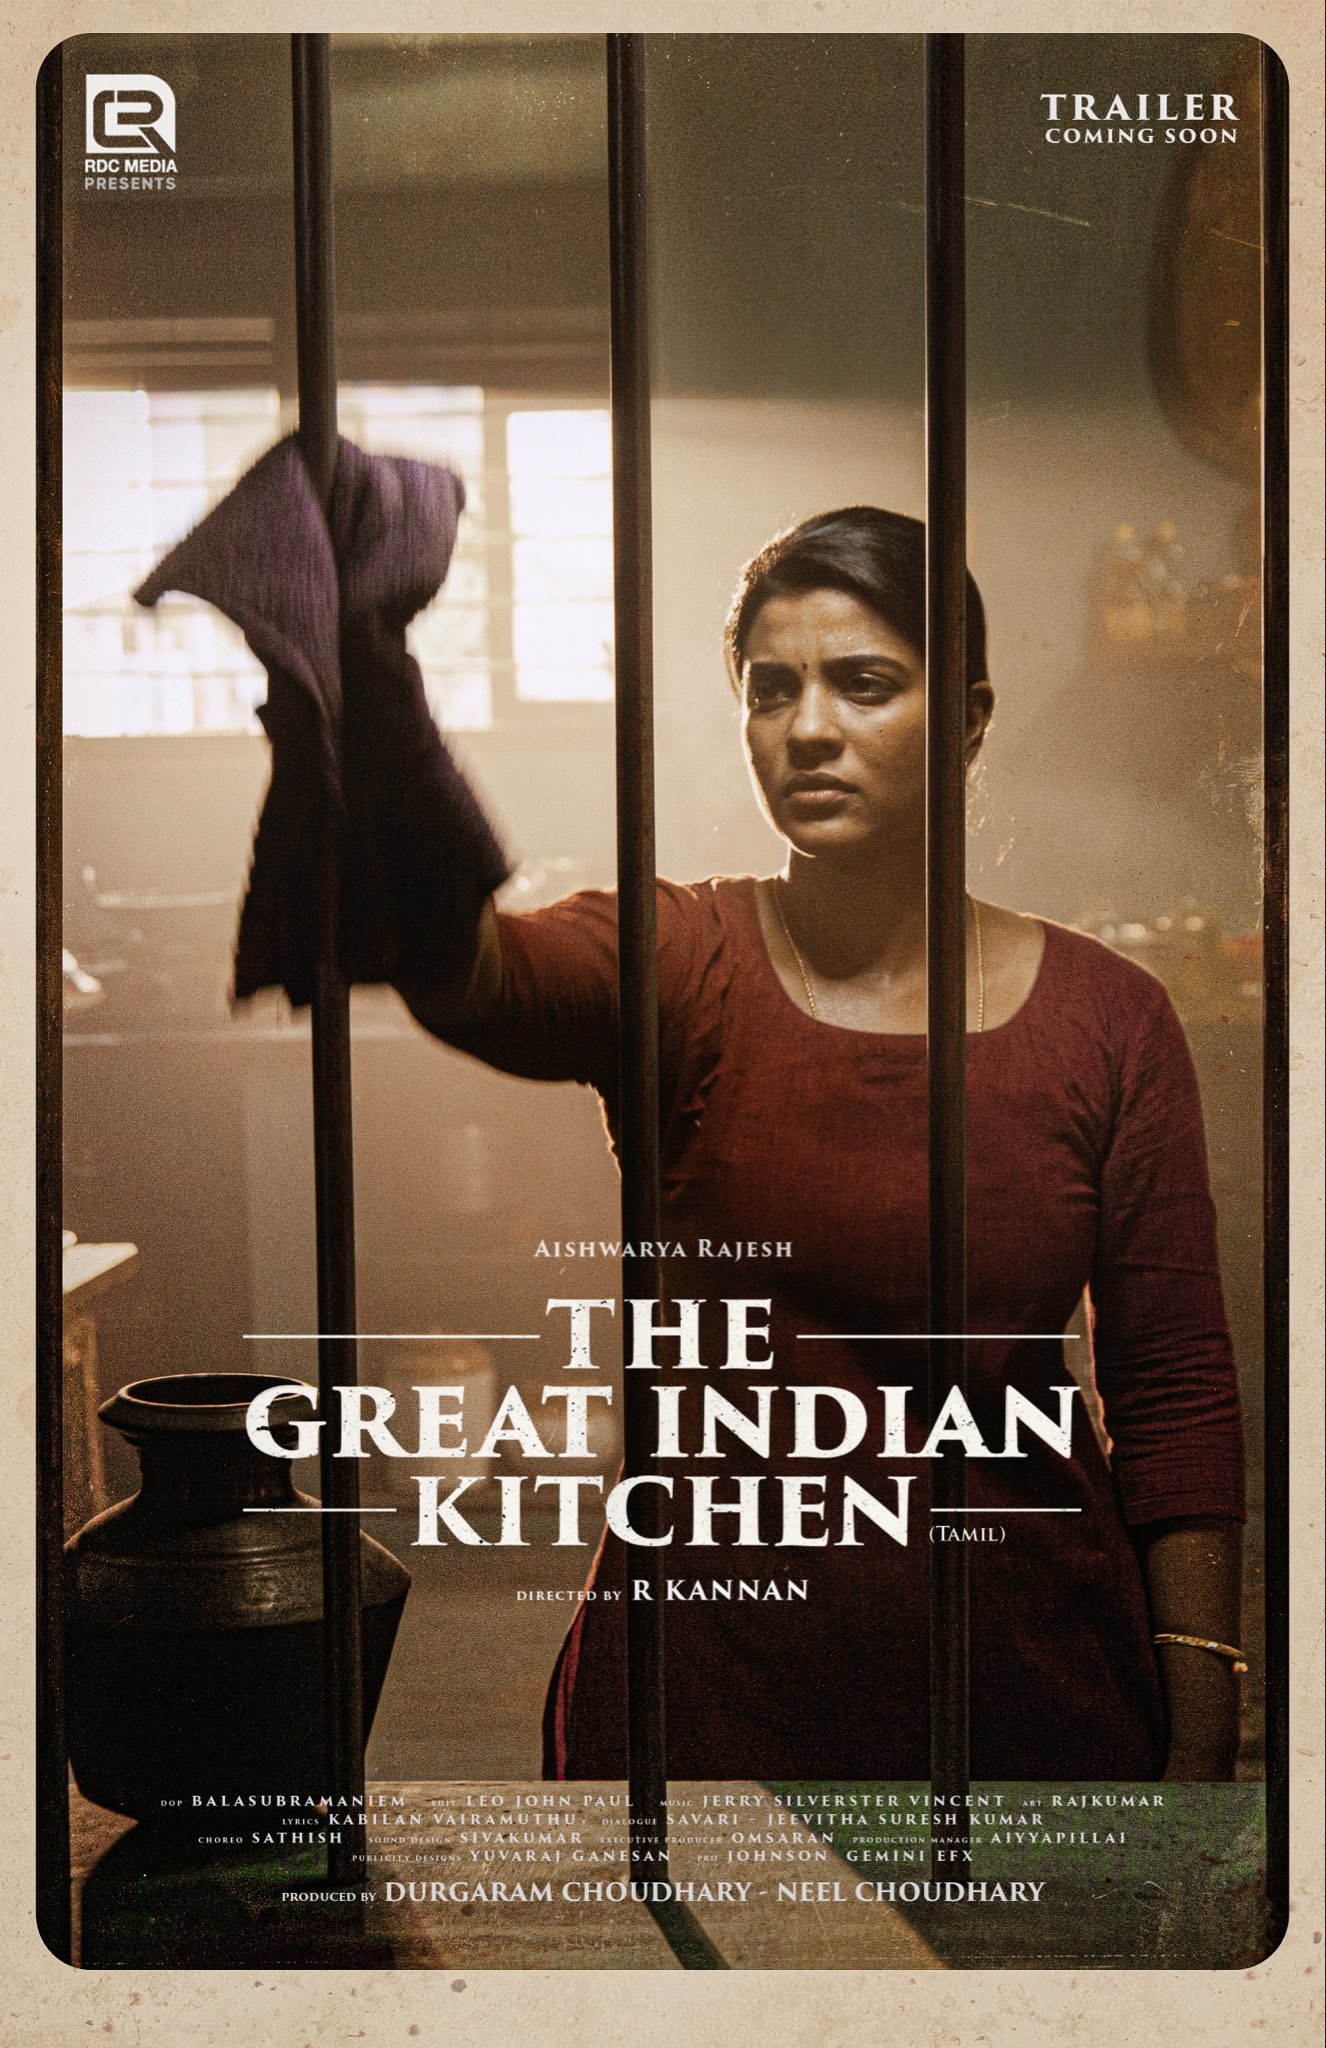 The Great Indian Kitchen Movie Review